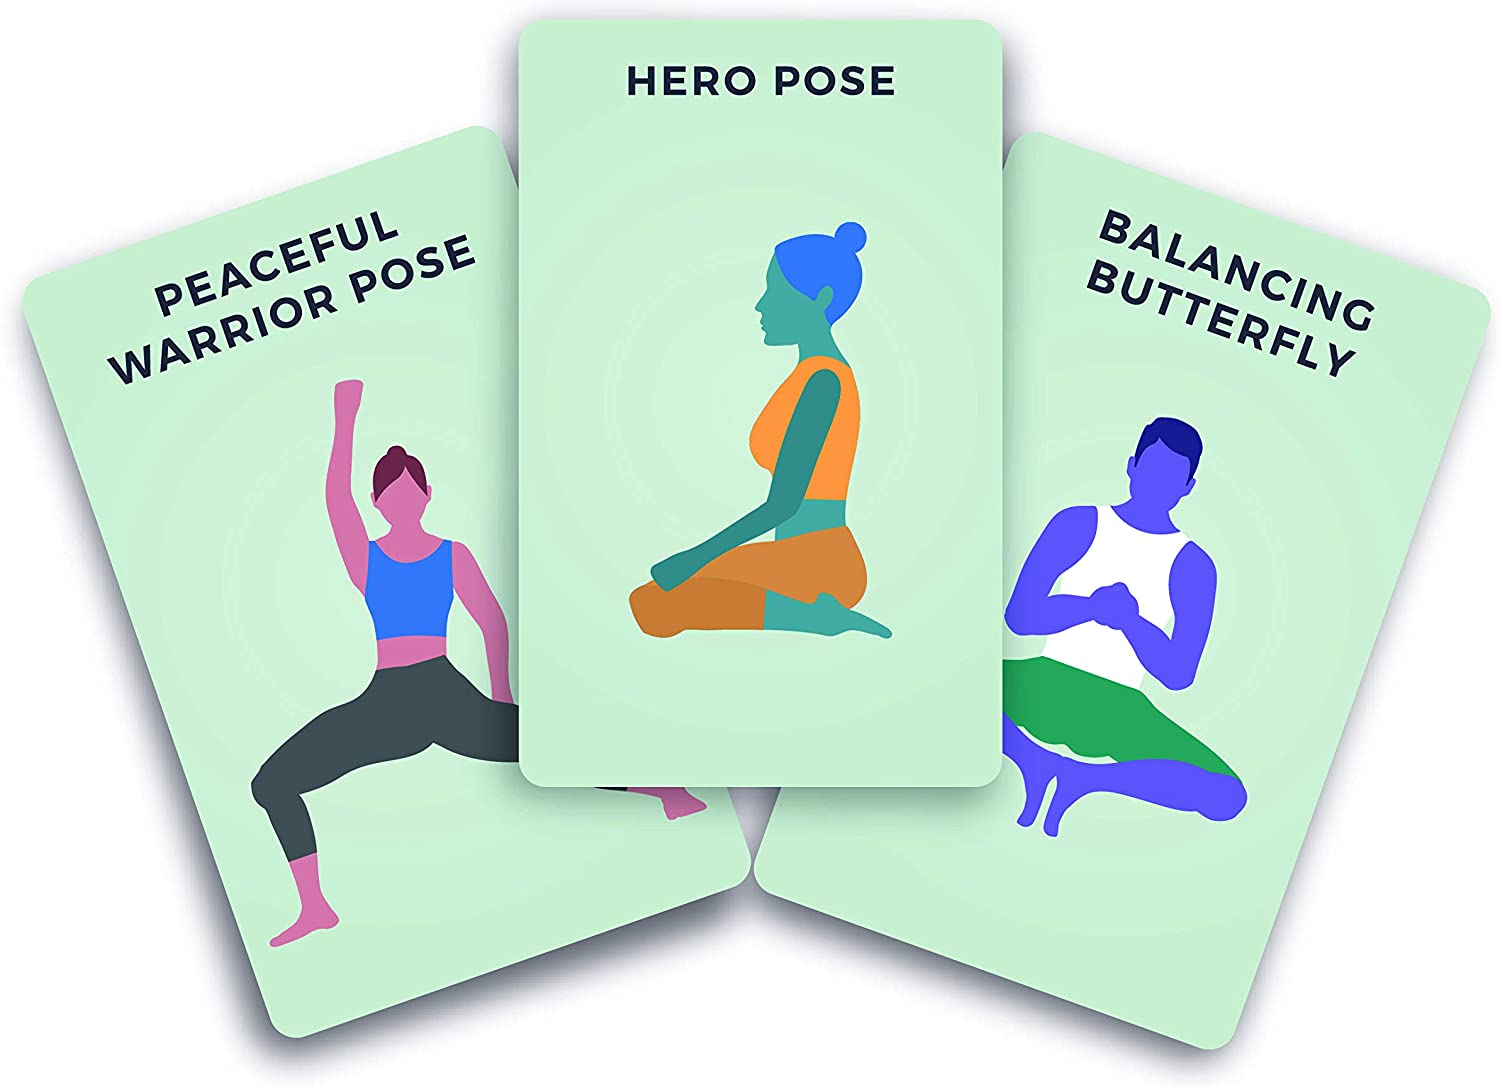 Gift Republic Unisex Yoga Poses Activity Cards 100 Cards Color Green